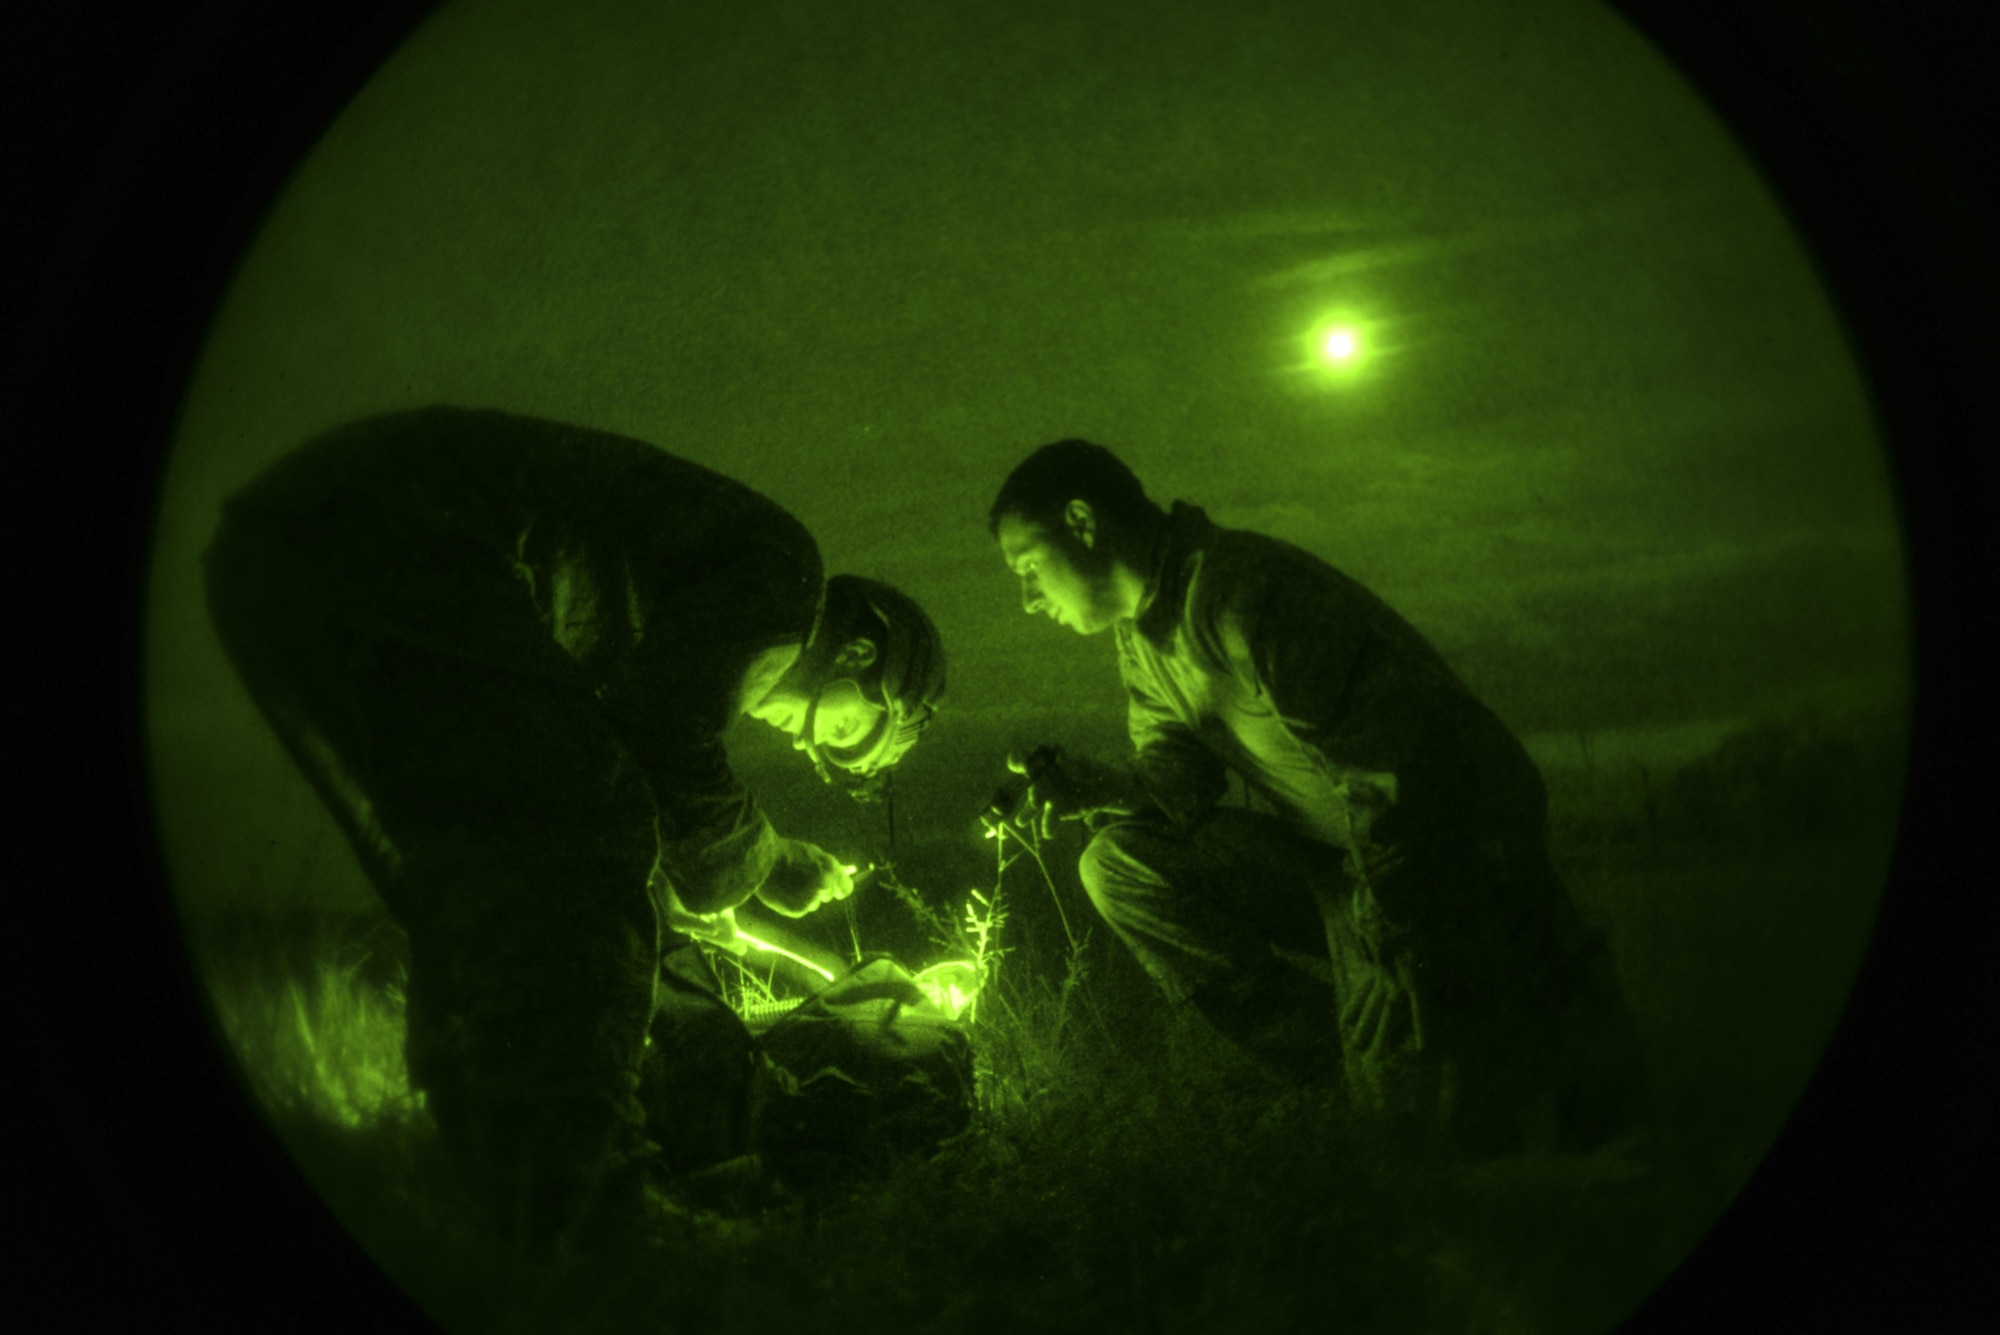 Senior Airman Frank Kritzman (left) and Staff Sgt. Adam Wickizer, both explosive ordnance disposal technicians with the 633rd Civil Engineer Squadron at Joint Base Langley-Eustis, Va., work together to identify a potential threat as part of Operation Llama Fury, Aug. 27, 2015, at Seymour Johnson Air Force Base, N.C. To further test their abilities, each team was able to “purchase” a select amount of gear in order to conduct different scenarios under the guise of darkness. (U.S. Air Force photo/Senior Airman Brittain Crolley)